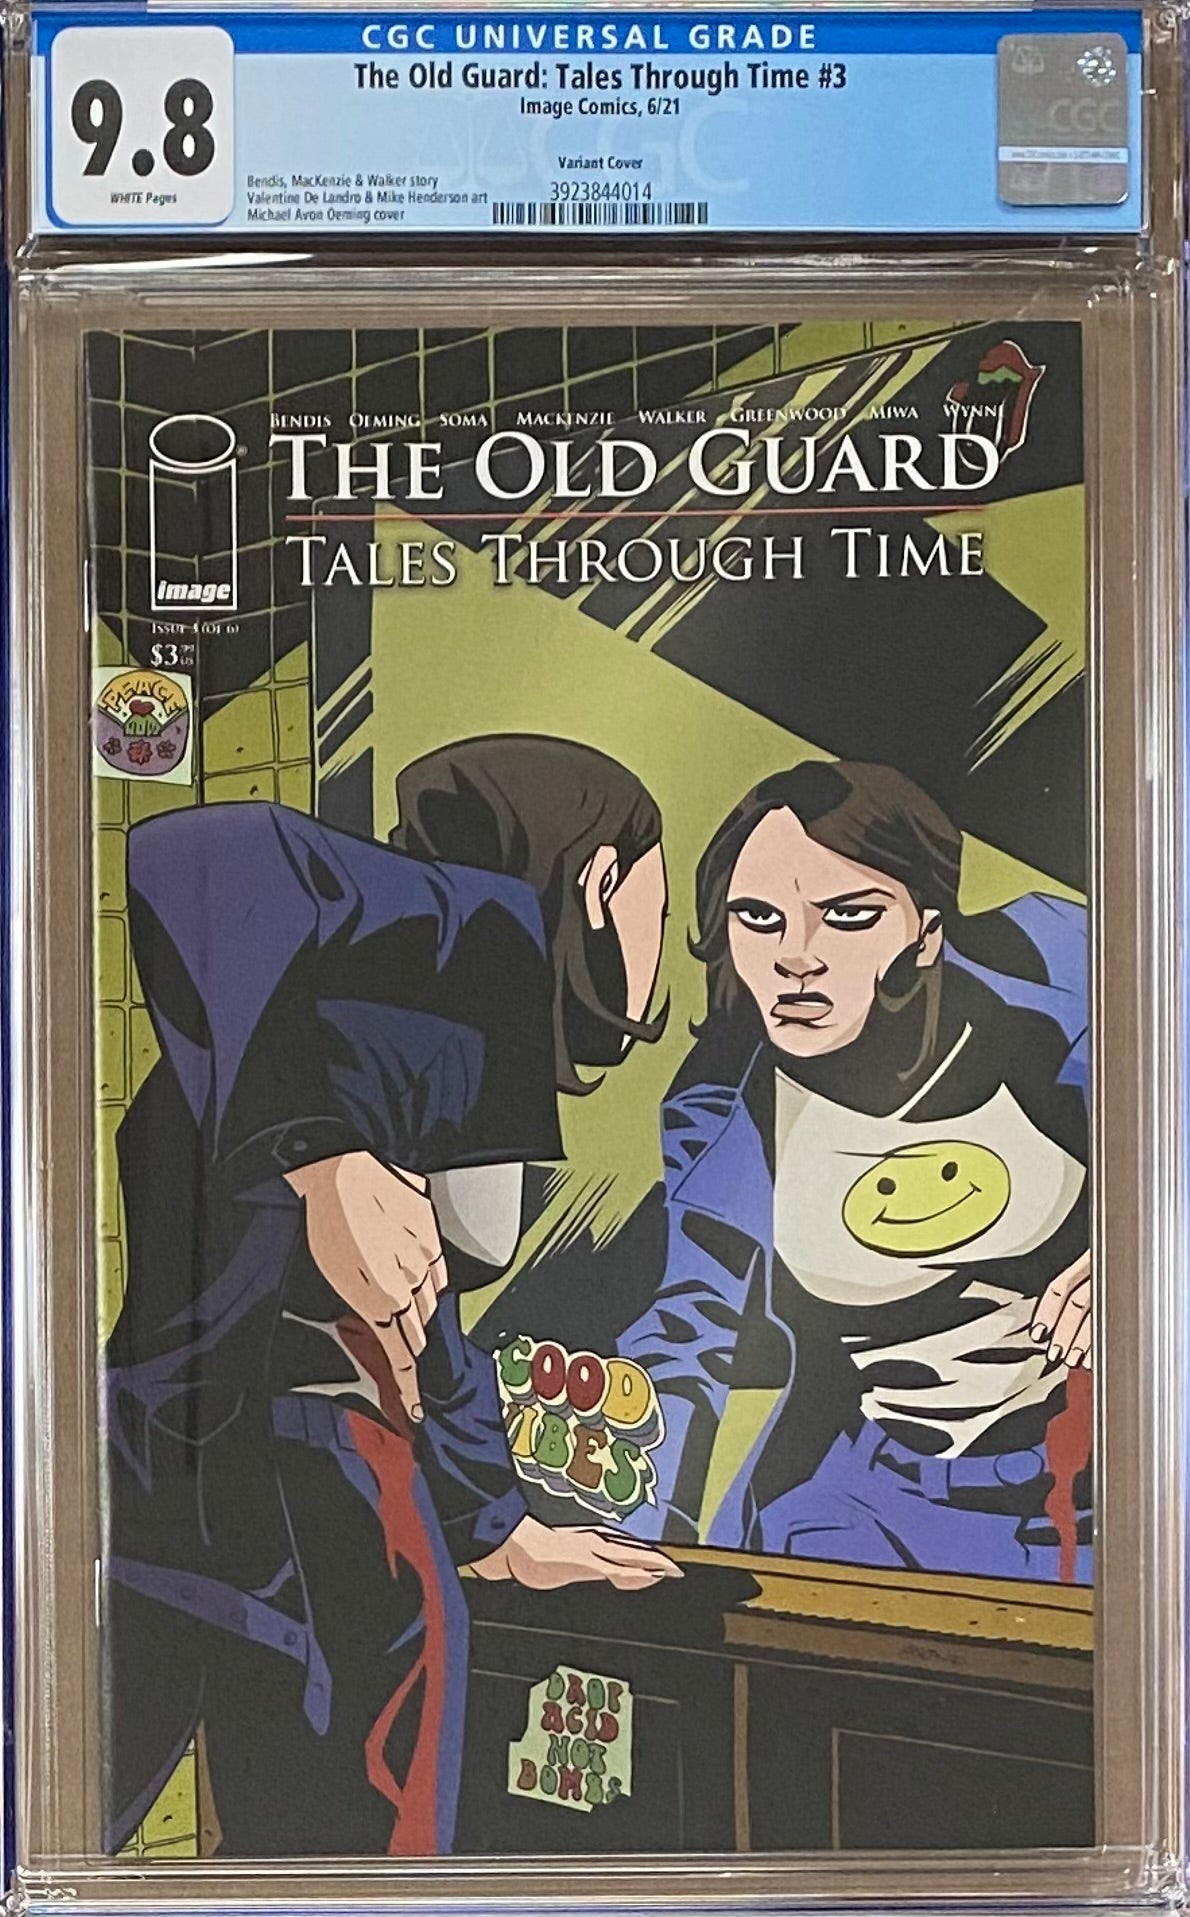 The Old Guard: Tales Through Time #3 Oeming Variant CGC 9.8